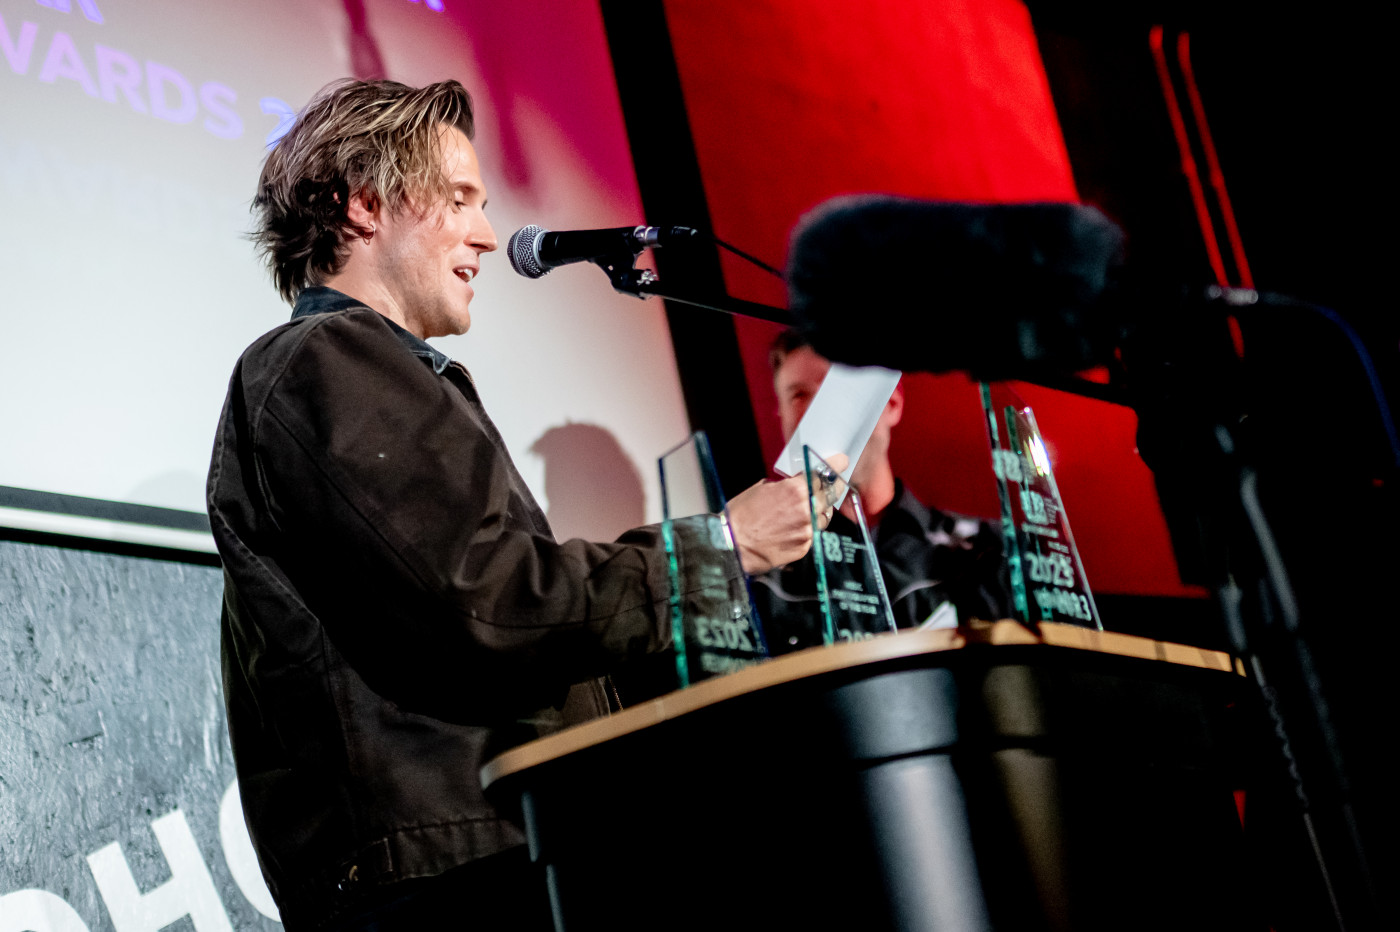 McFly's Dougie Poynter presented the award for Must See Live Act to The Lottery Winners. Photo: Thomas Jackson